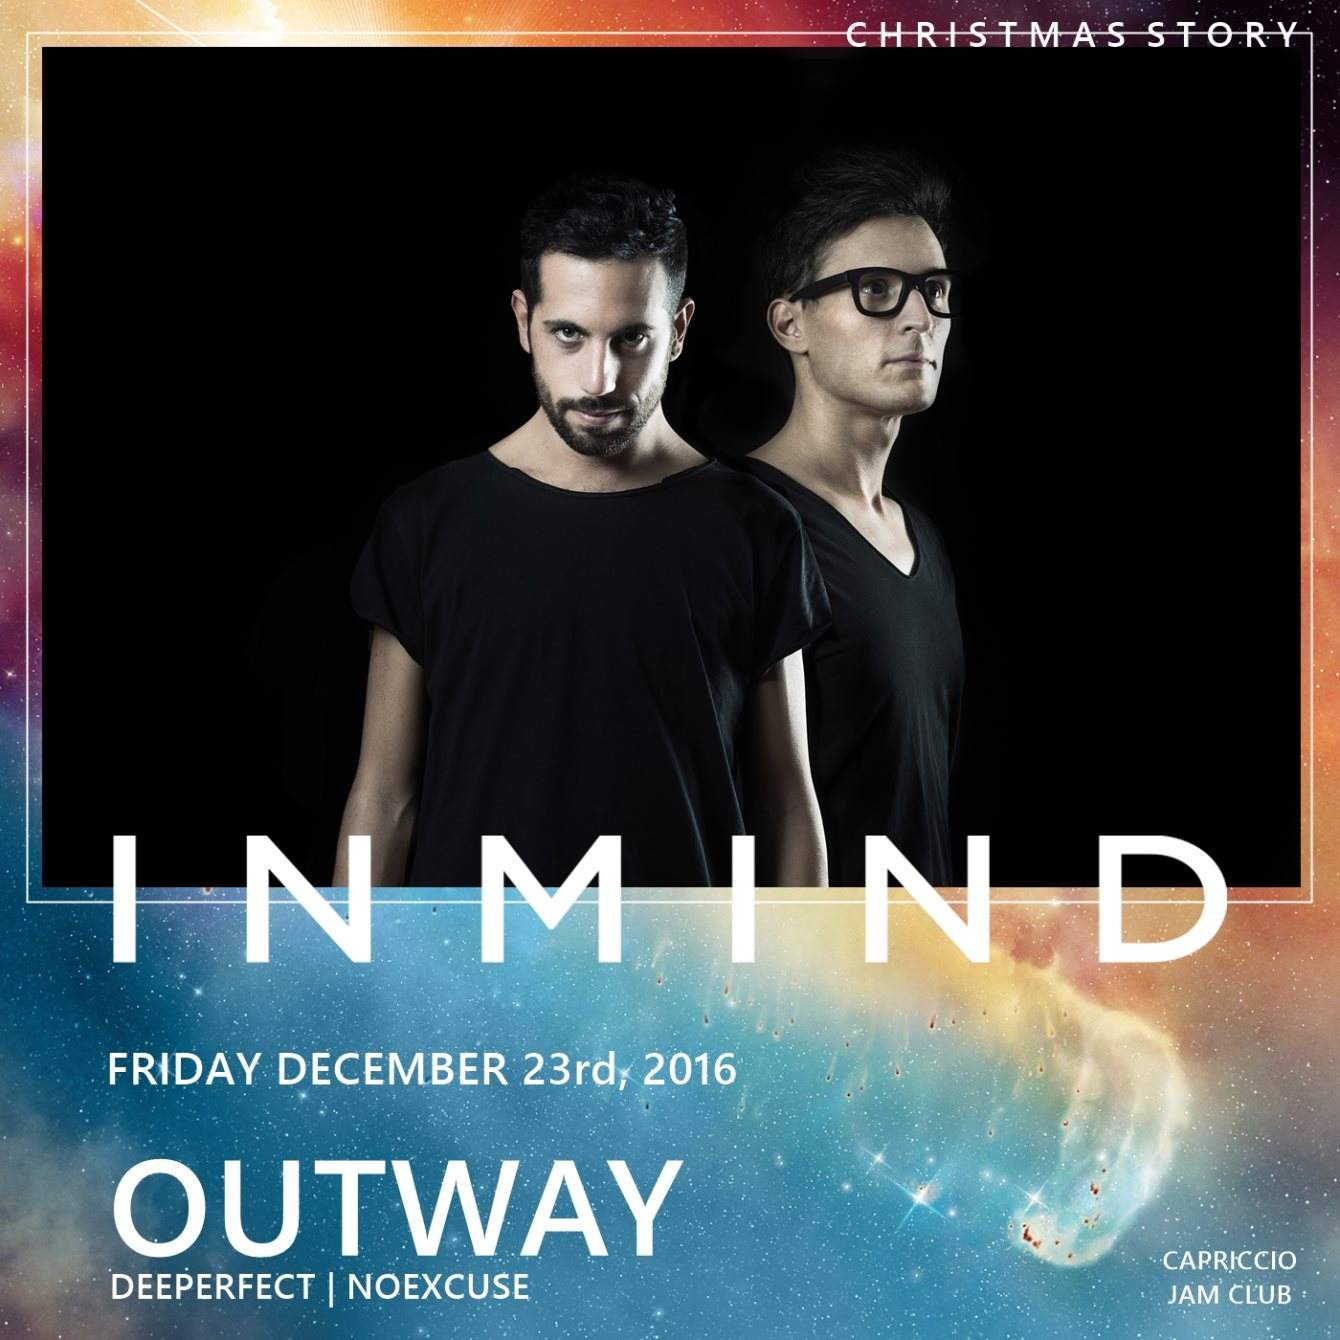 Inmind Christmas Story with Outway, Alessandro Diruggiero - フライヤー表